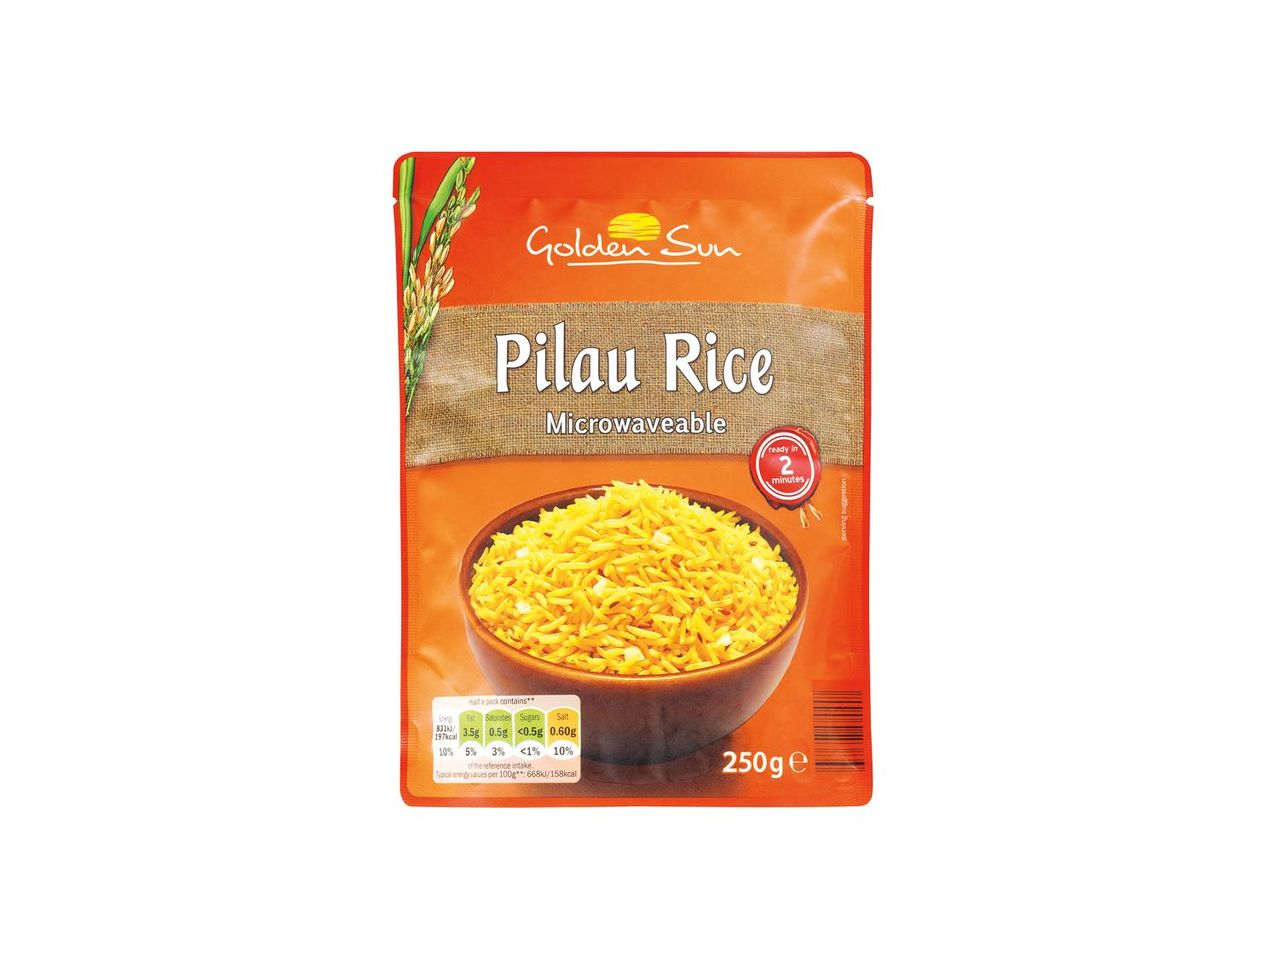 Go to full screen view: Golden Sun Microwave Pilau Rice - Image 1